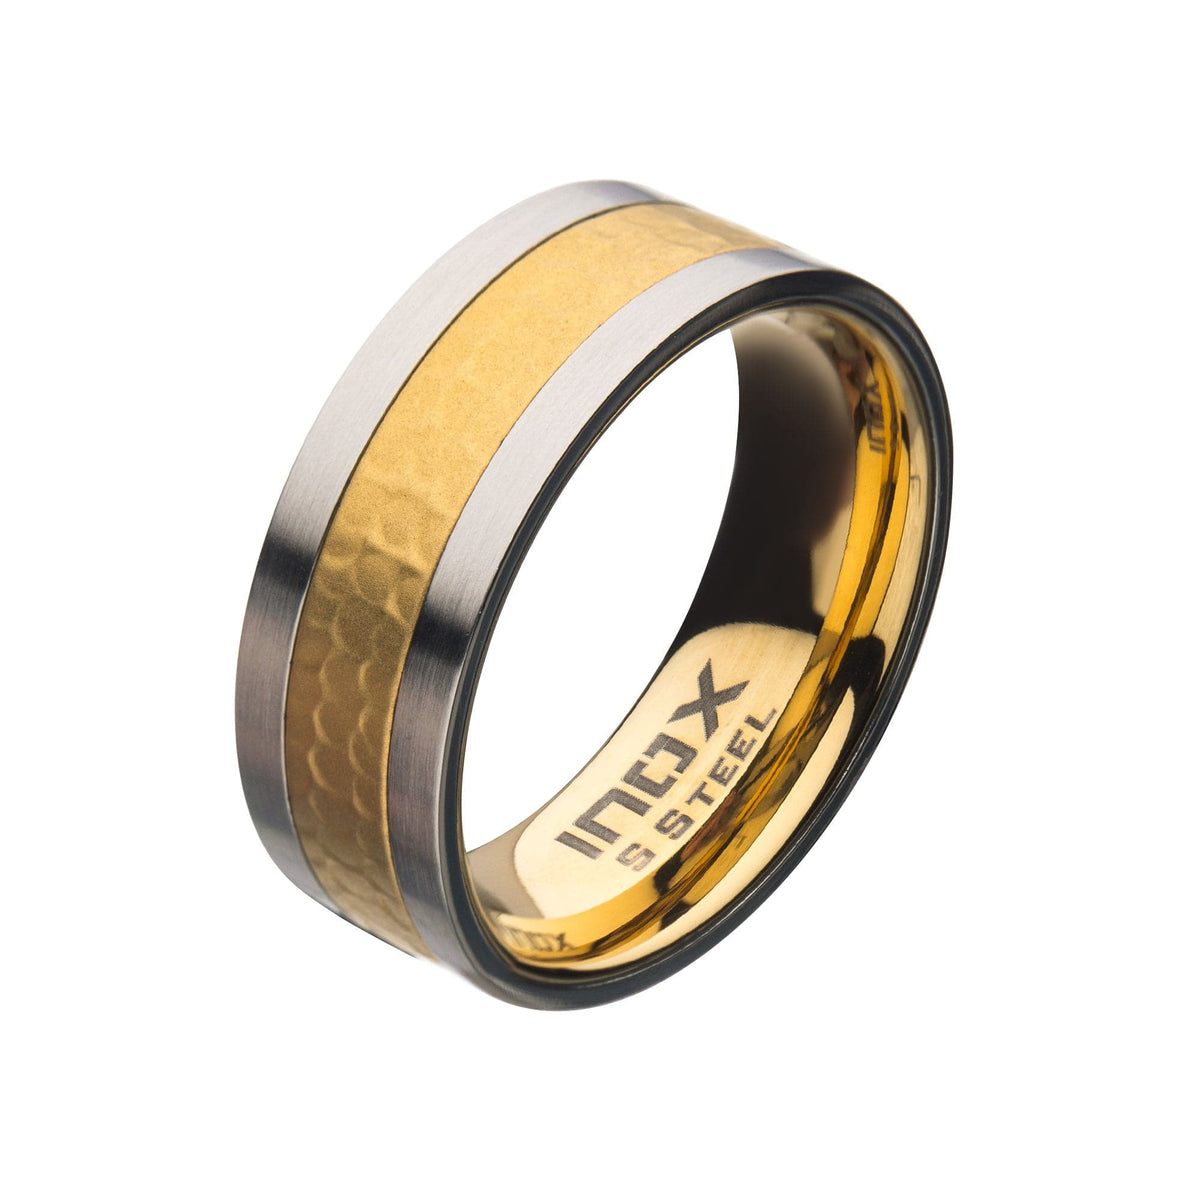 INOX JEWELRY Rings Golden Tone and Silver Tone Stainless Steel Matte Finish Hammered Band Ring